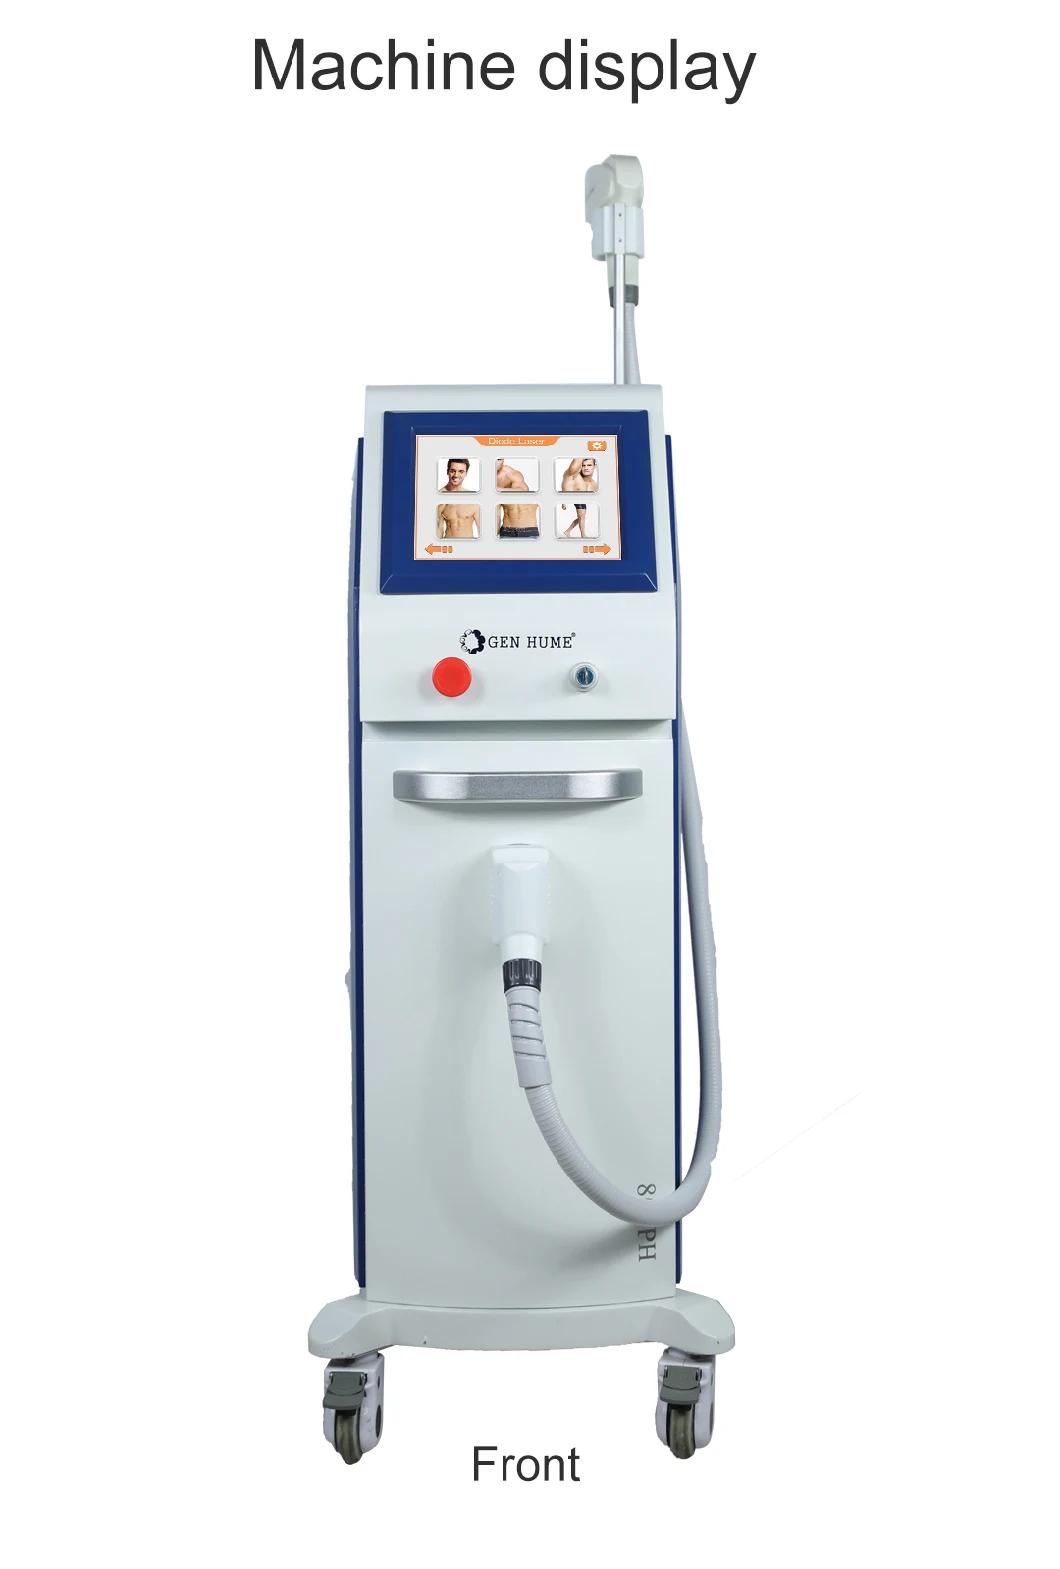 Laser Hair Removal Machine Laser 808nm Diode Laser Hair Removal Machine Price Beauty Salon Equipment Genhume